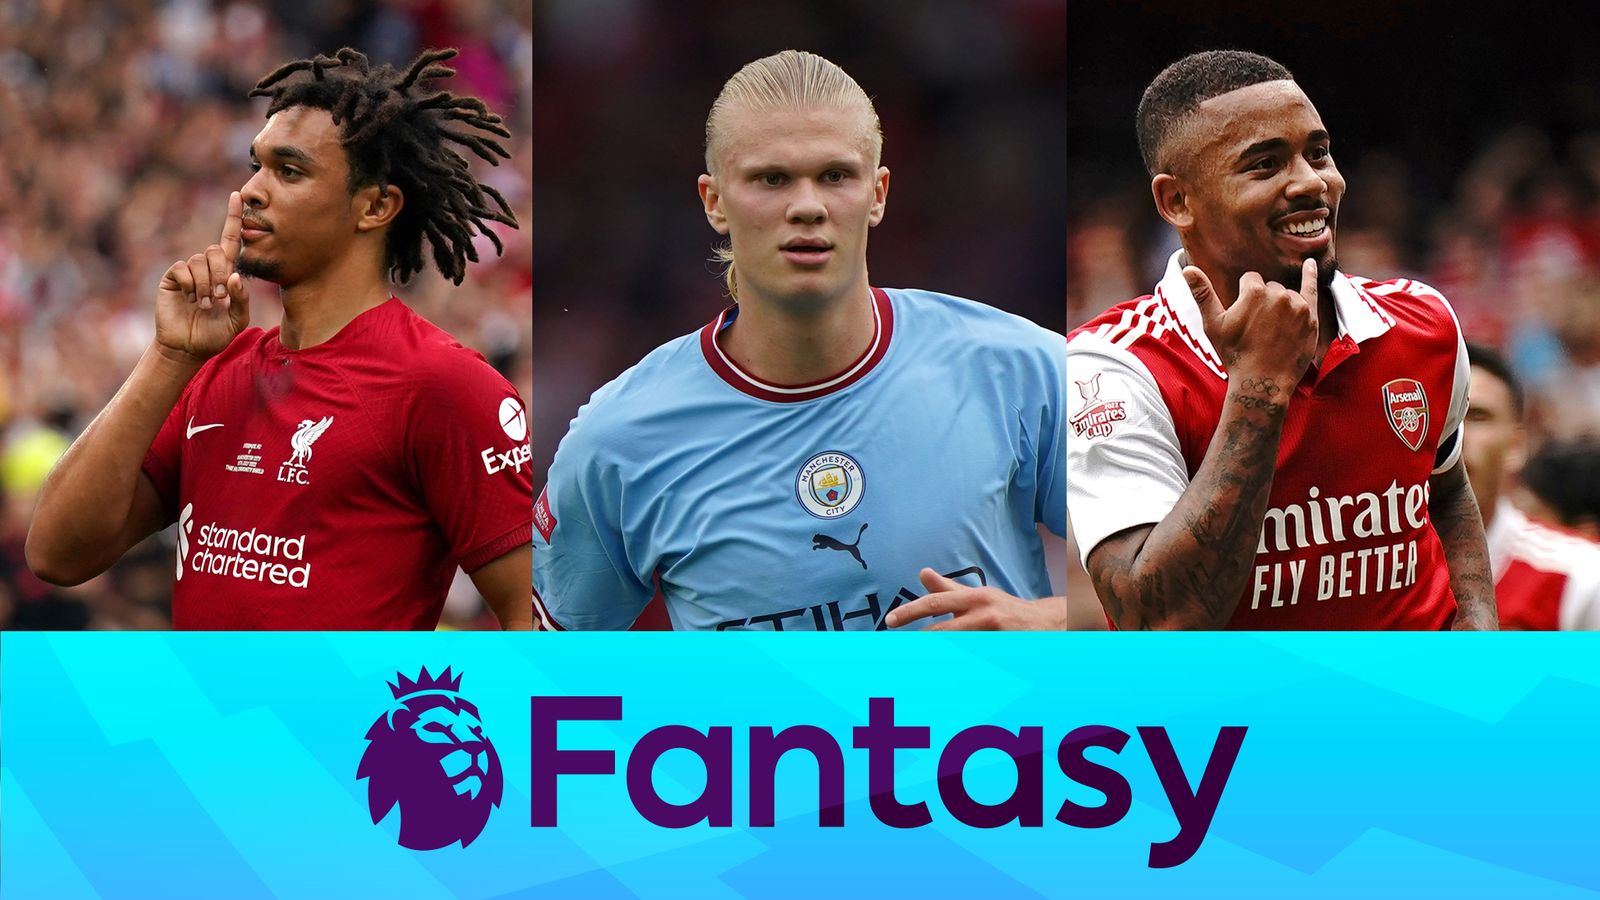 Fantasy Premier League 22/23: Gameweek 1 tips and advice from experts